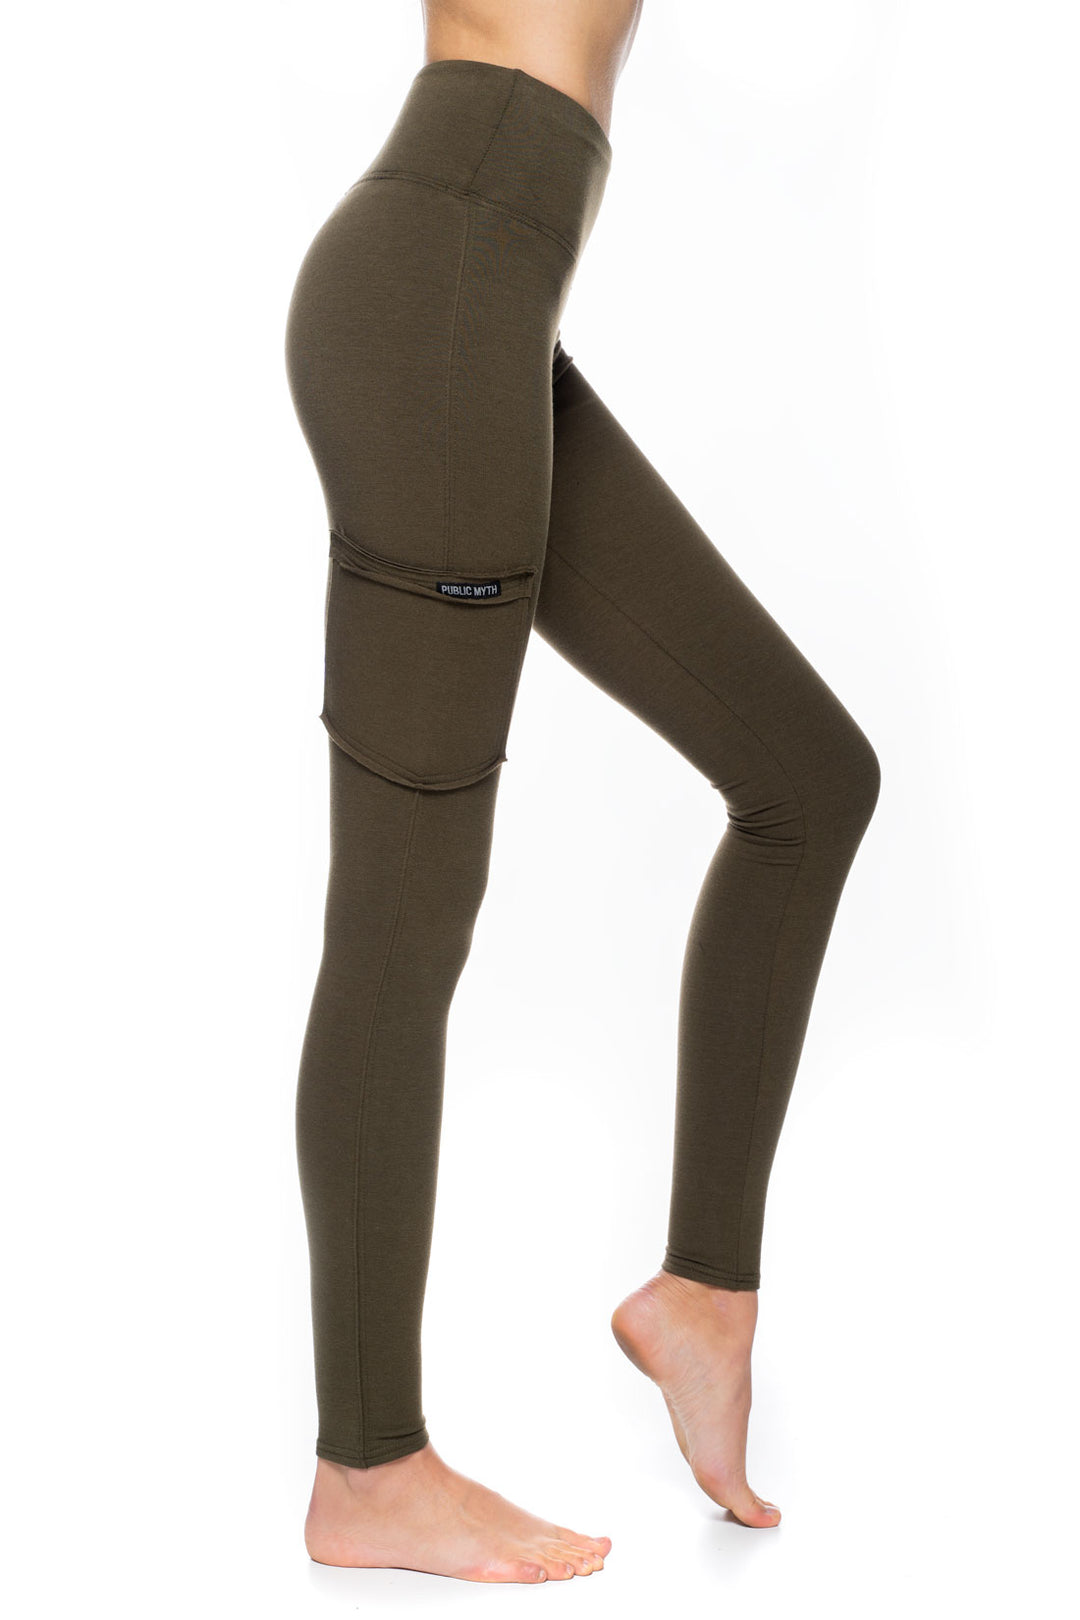 The Ultimate Guide to Women's Bamboo Leggings - Green Apple Active